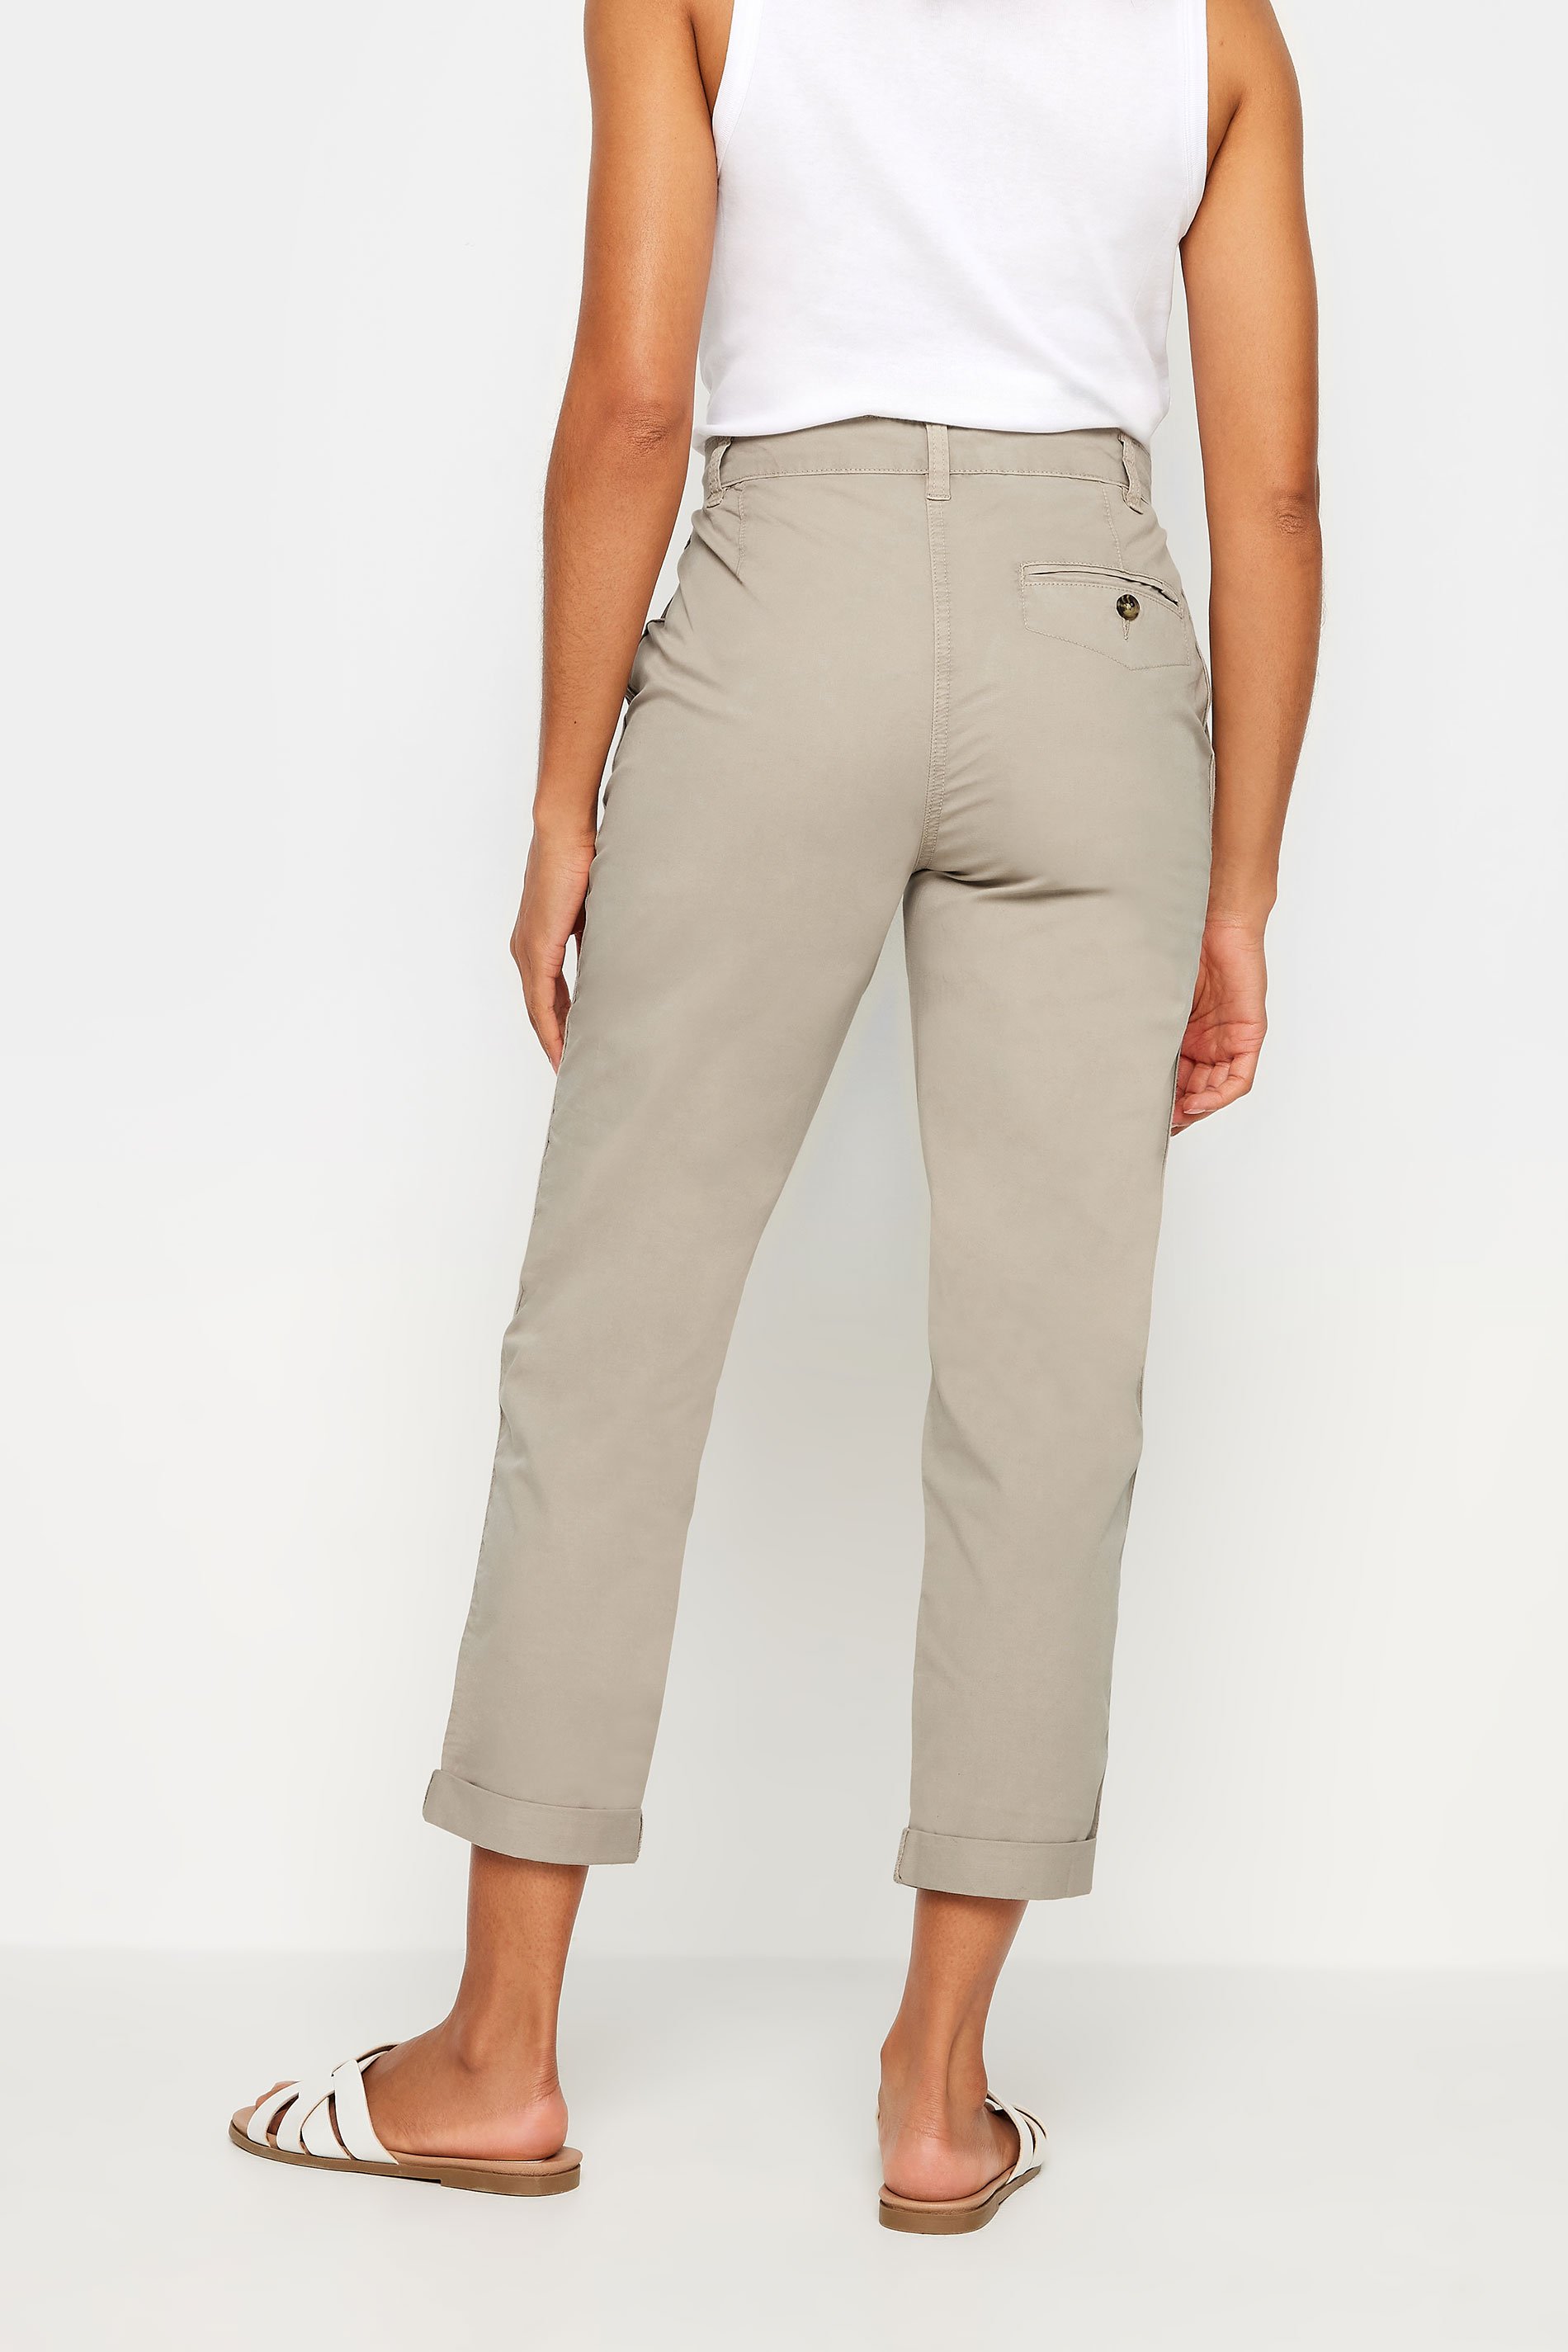 M&Co Natural Brown Chino Trousers | M&Co 3